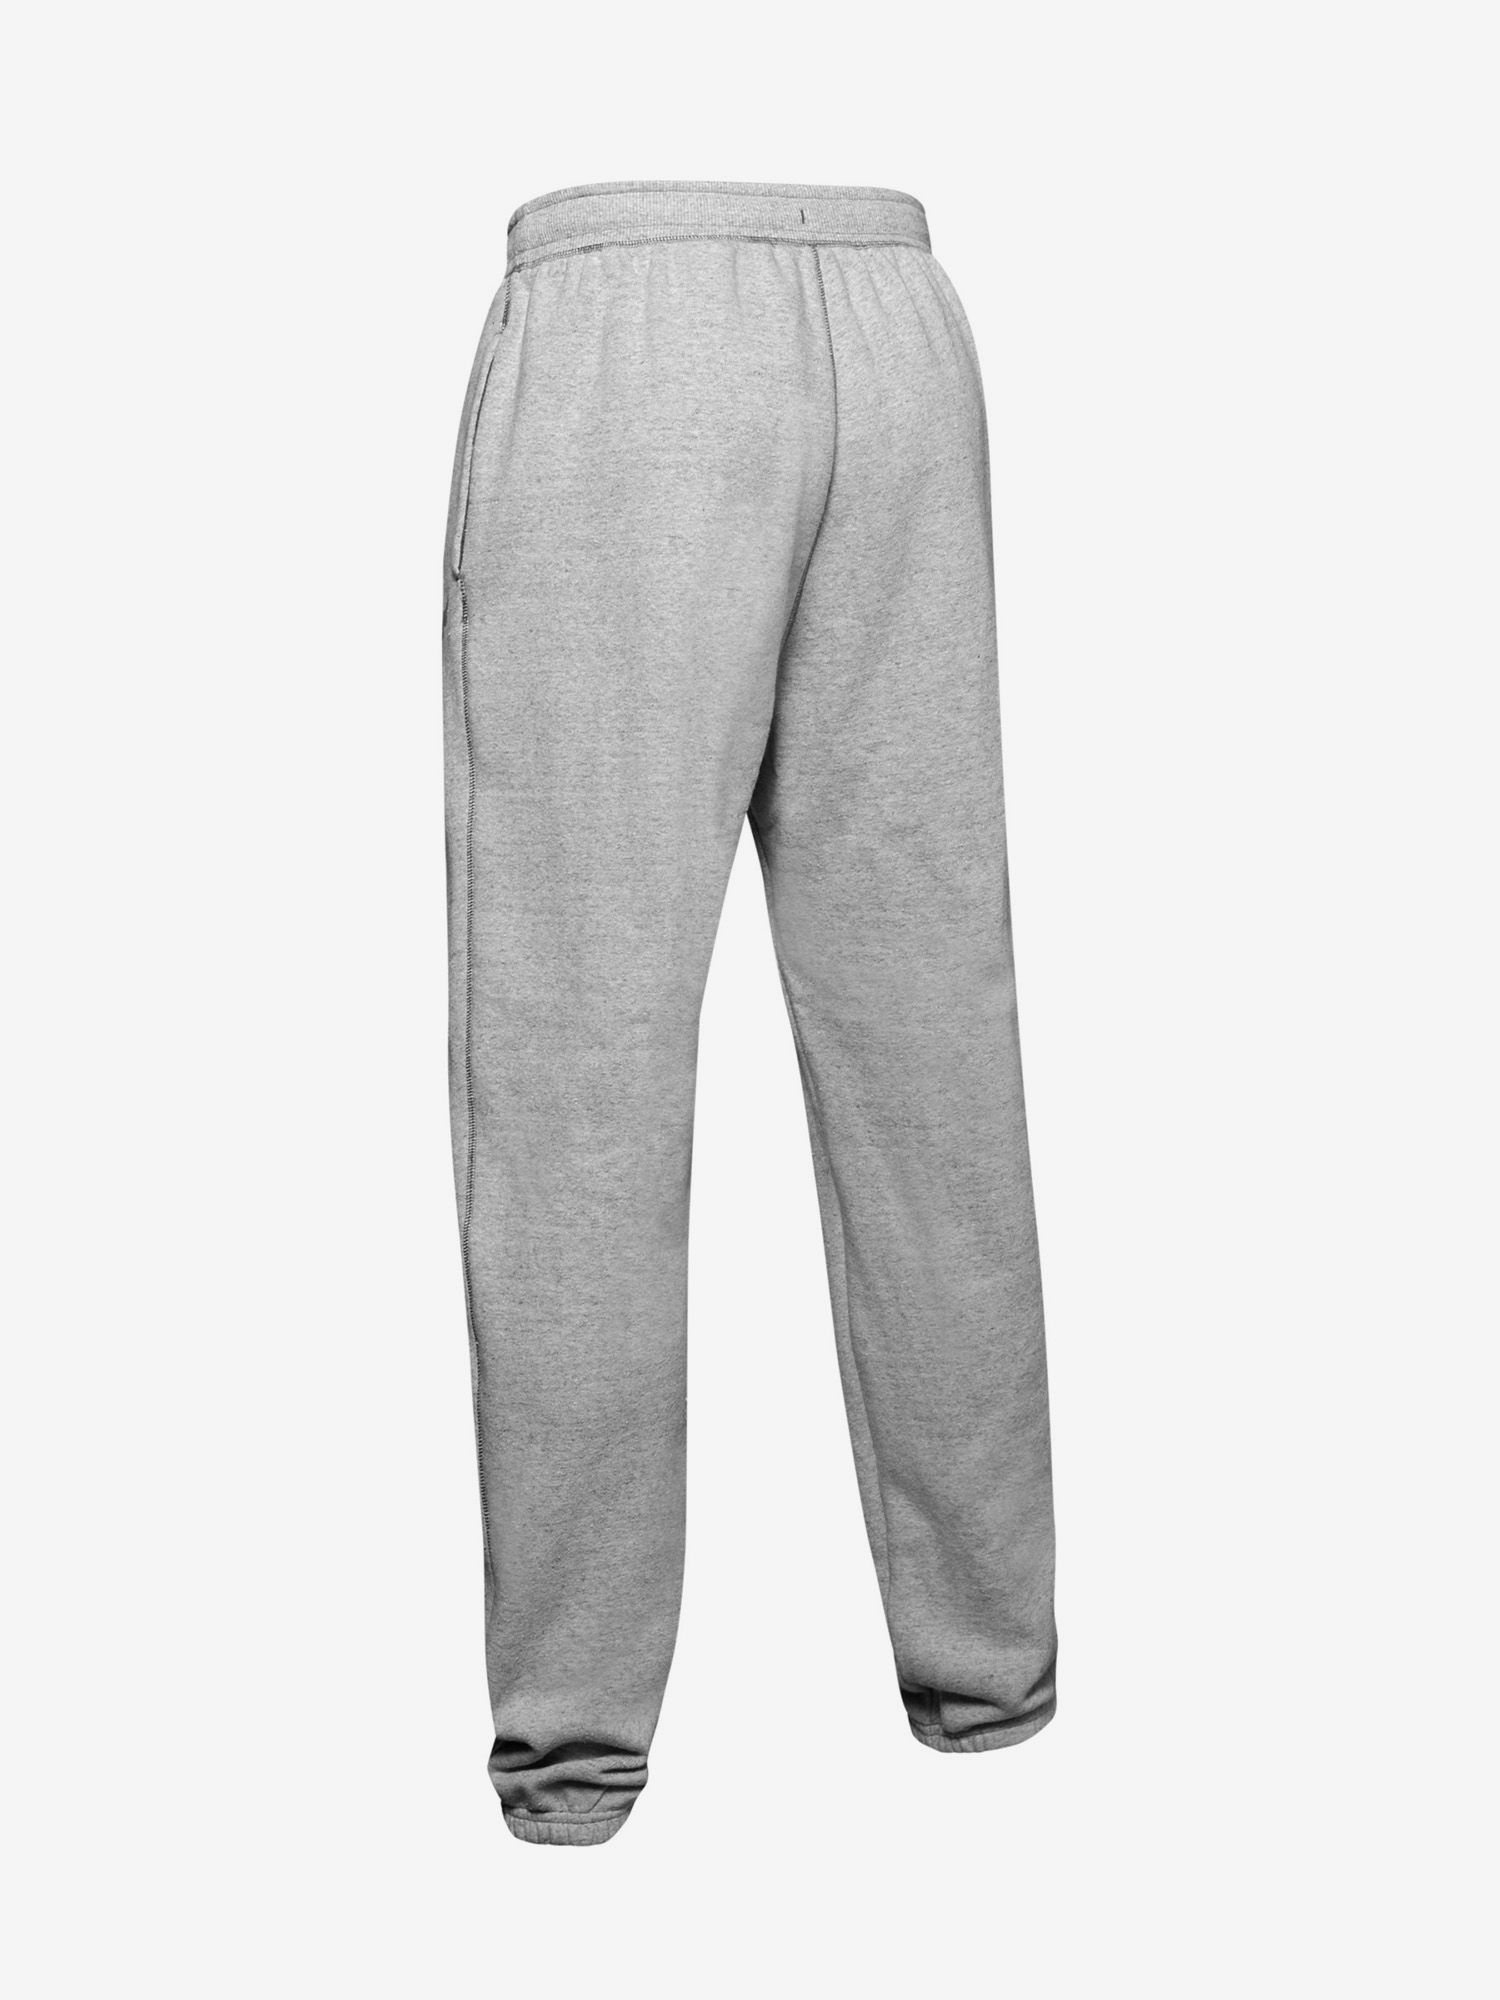 Tepláky Under Armour PROJECT ROCK WARMUP BOTTOM-GRY (2)